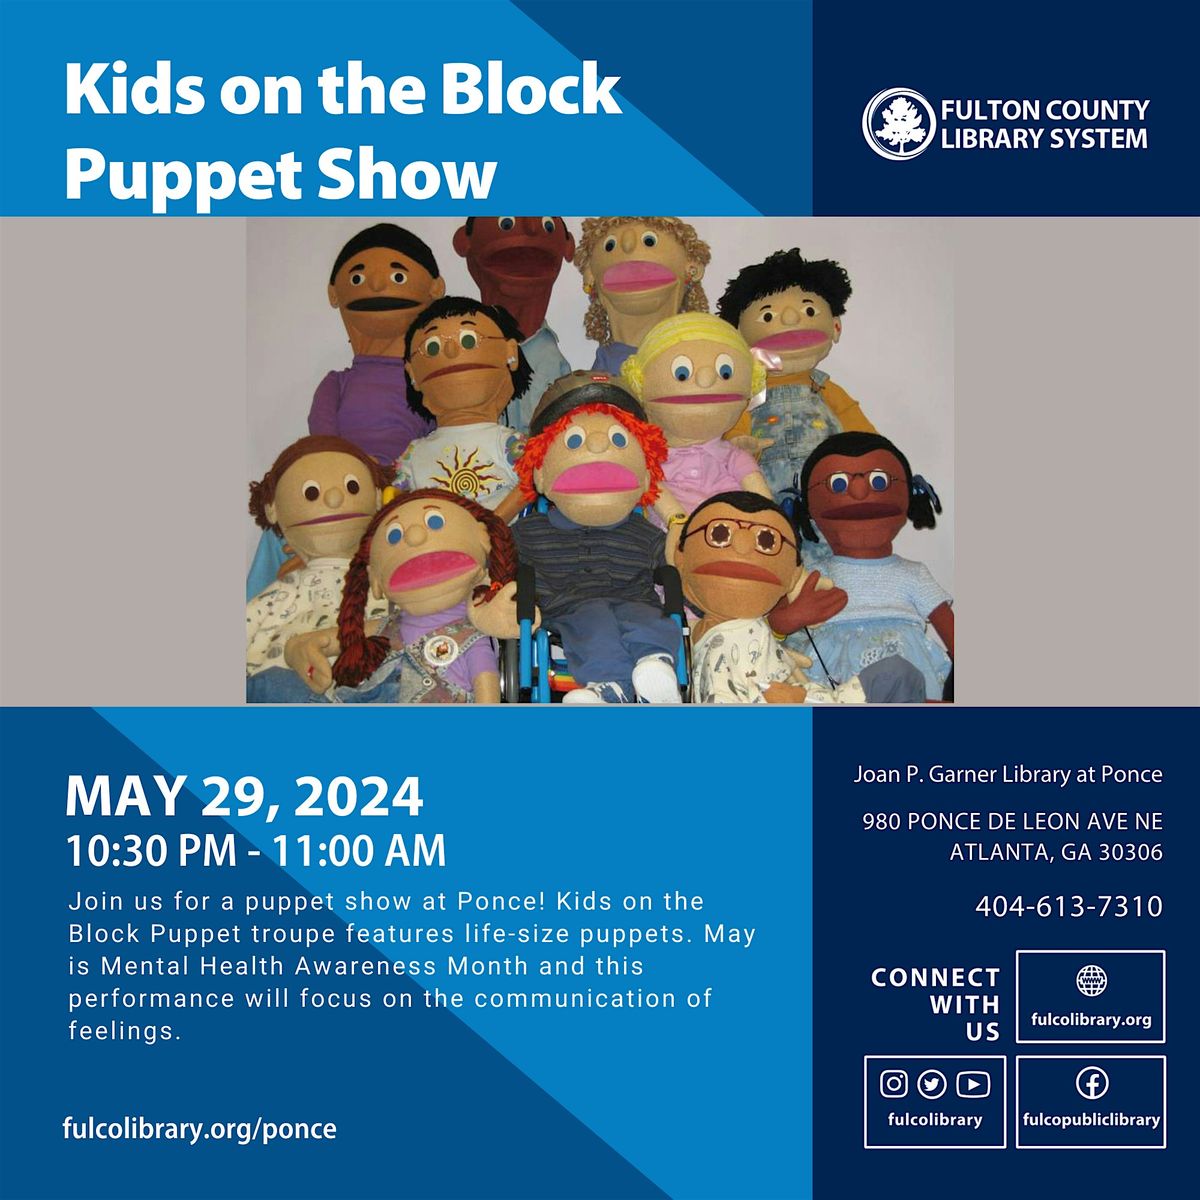 Kids on the Block Puppet Show